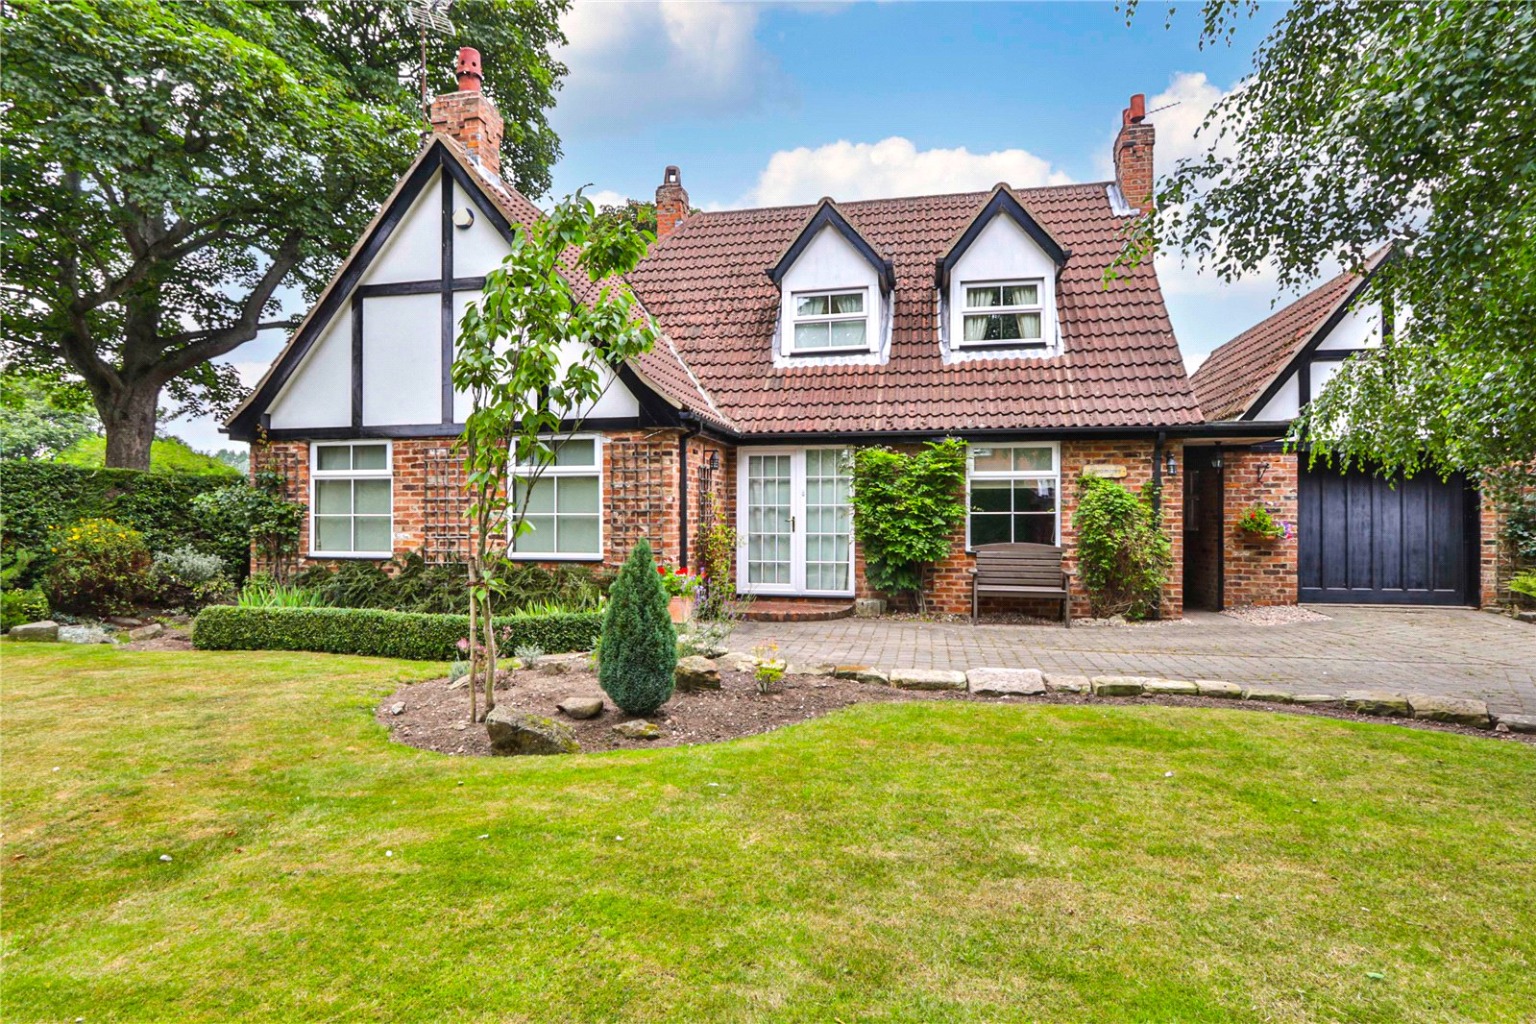 4 bed detached house for sale in Baxtergate, Hedon 1